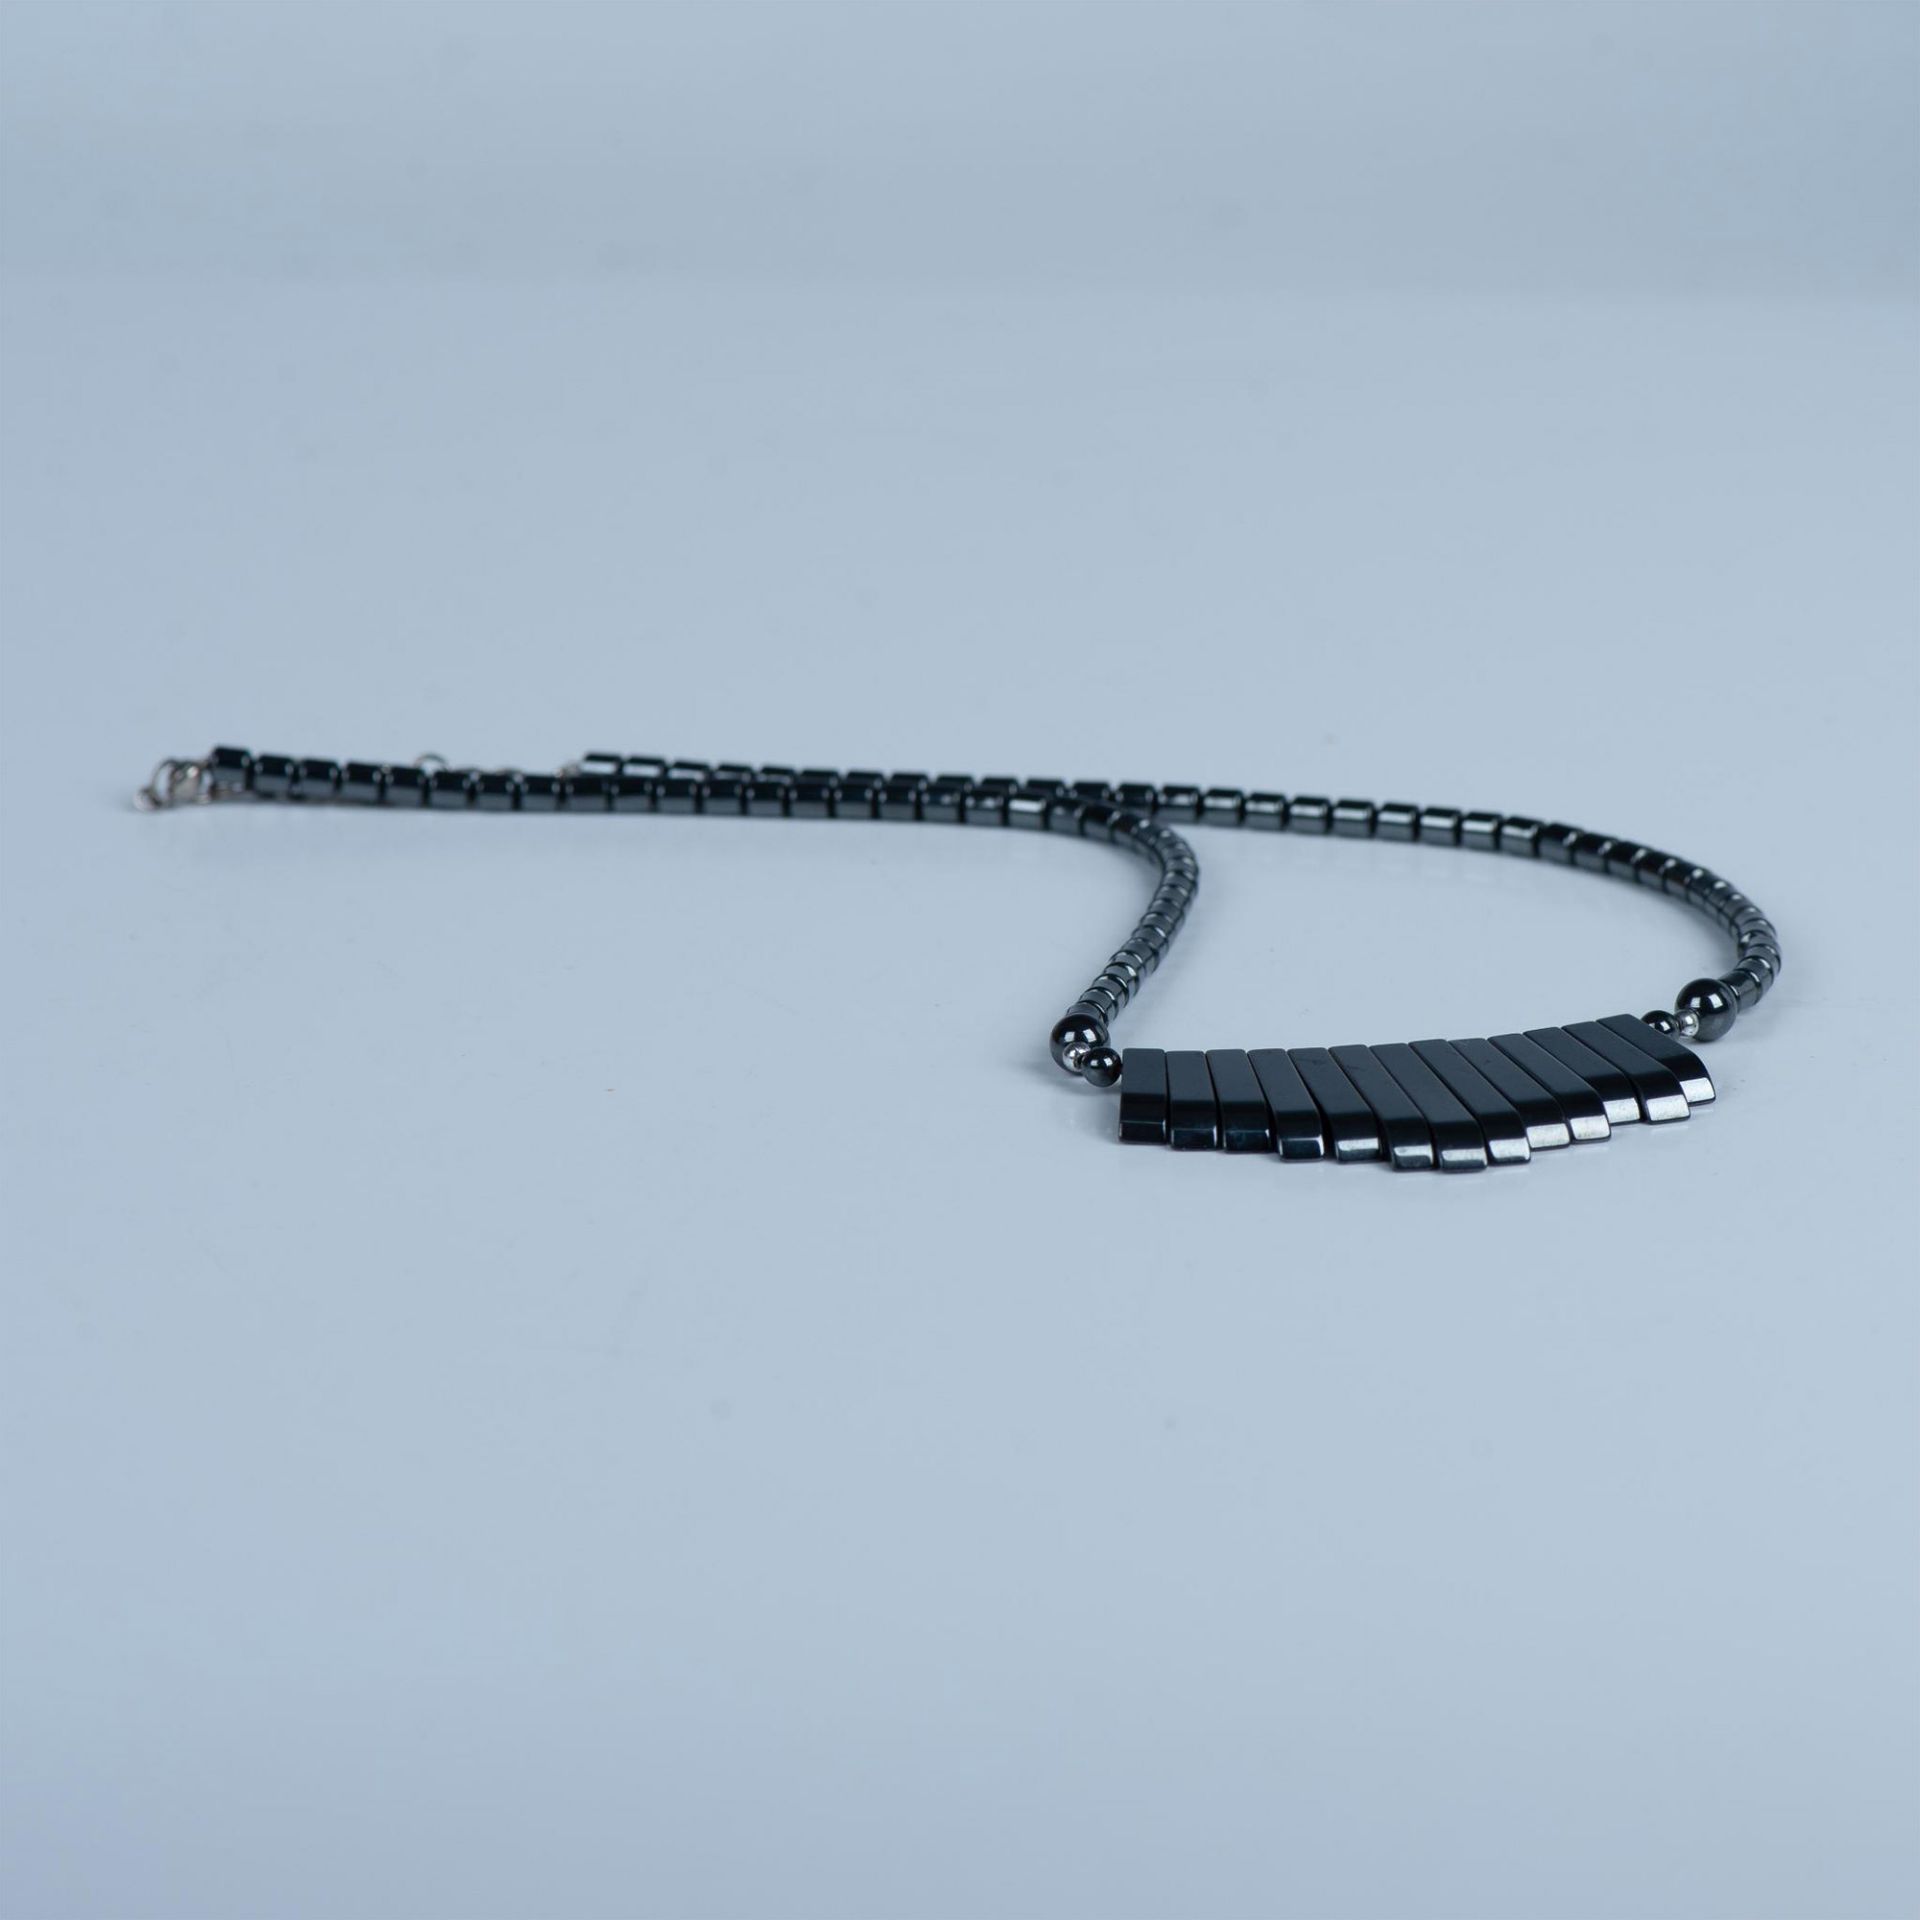 Hand Crafted Hematite Bead Necklace - Image 5 of 5